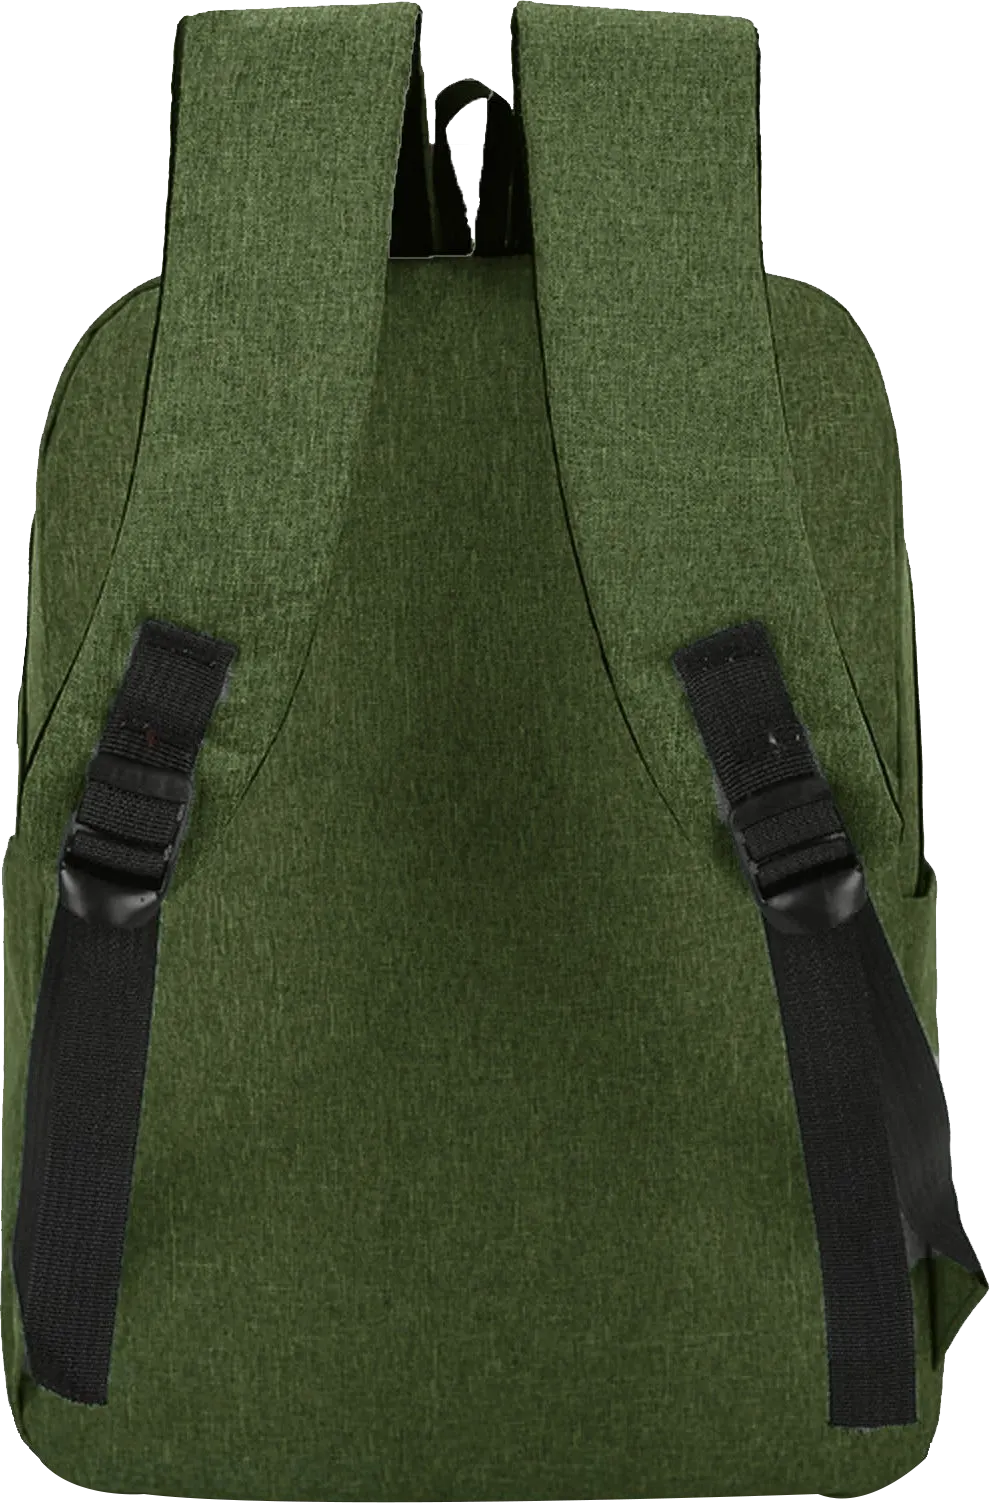 Cougar Laptop Backpack, 15.6 Inches, Light Green, S50